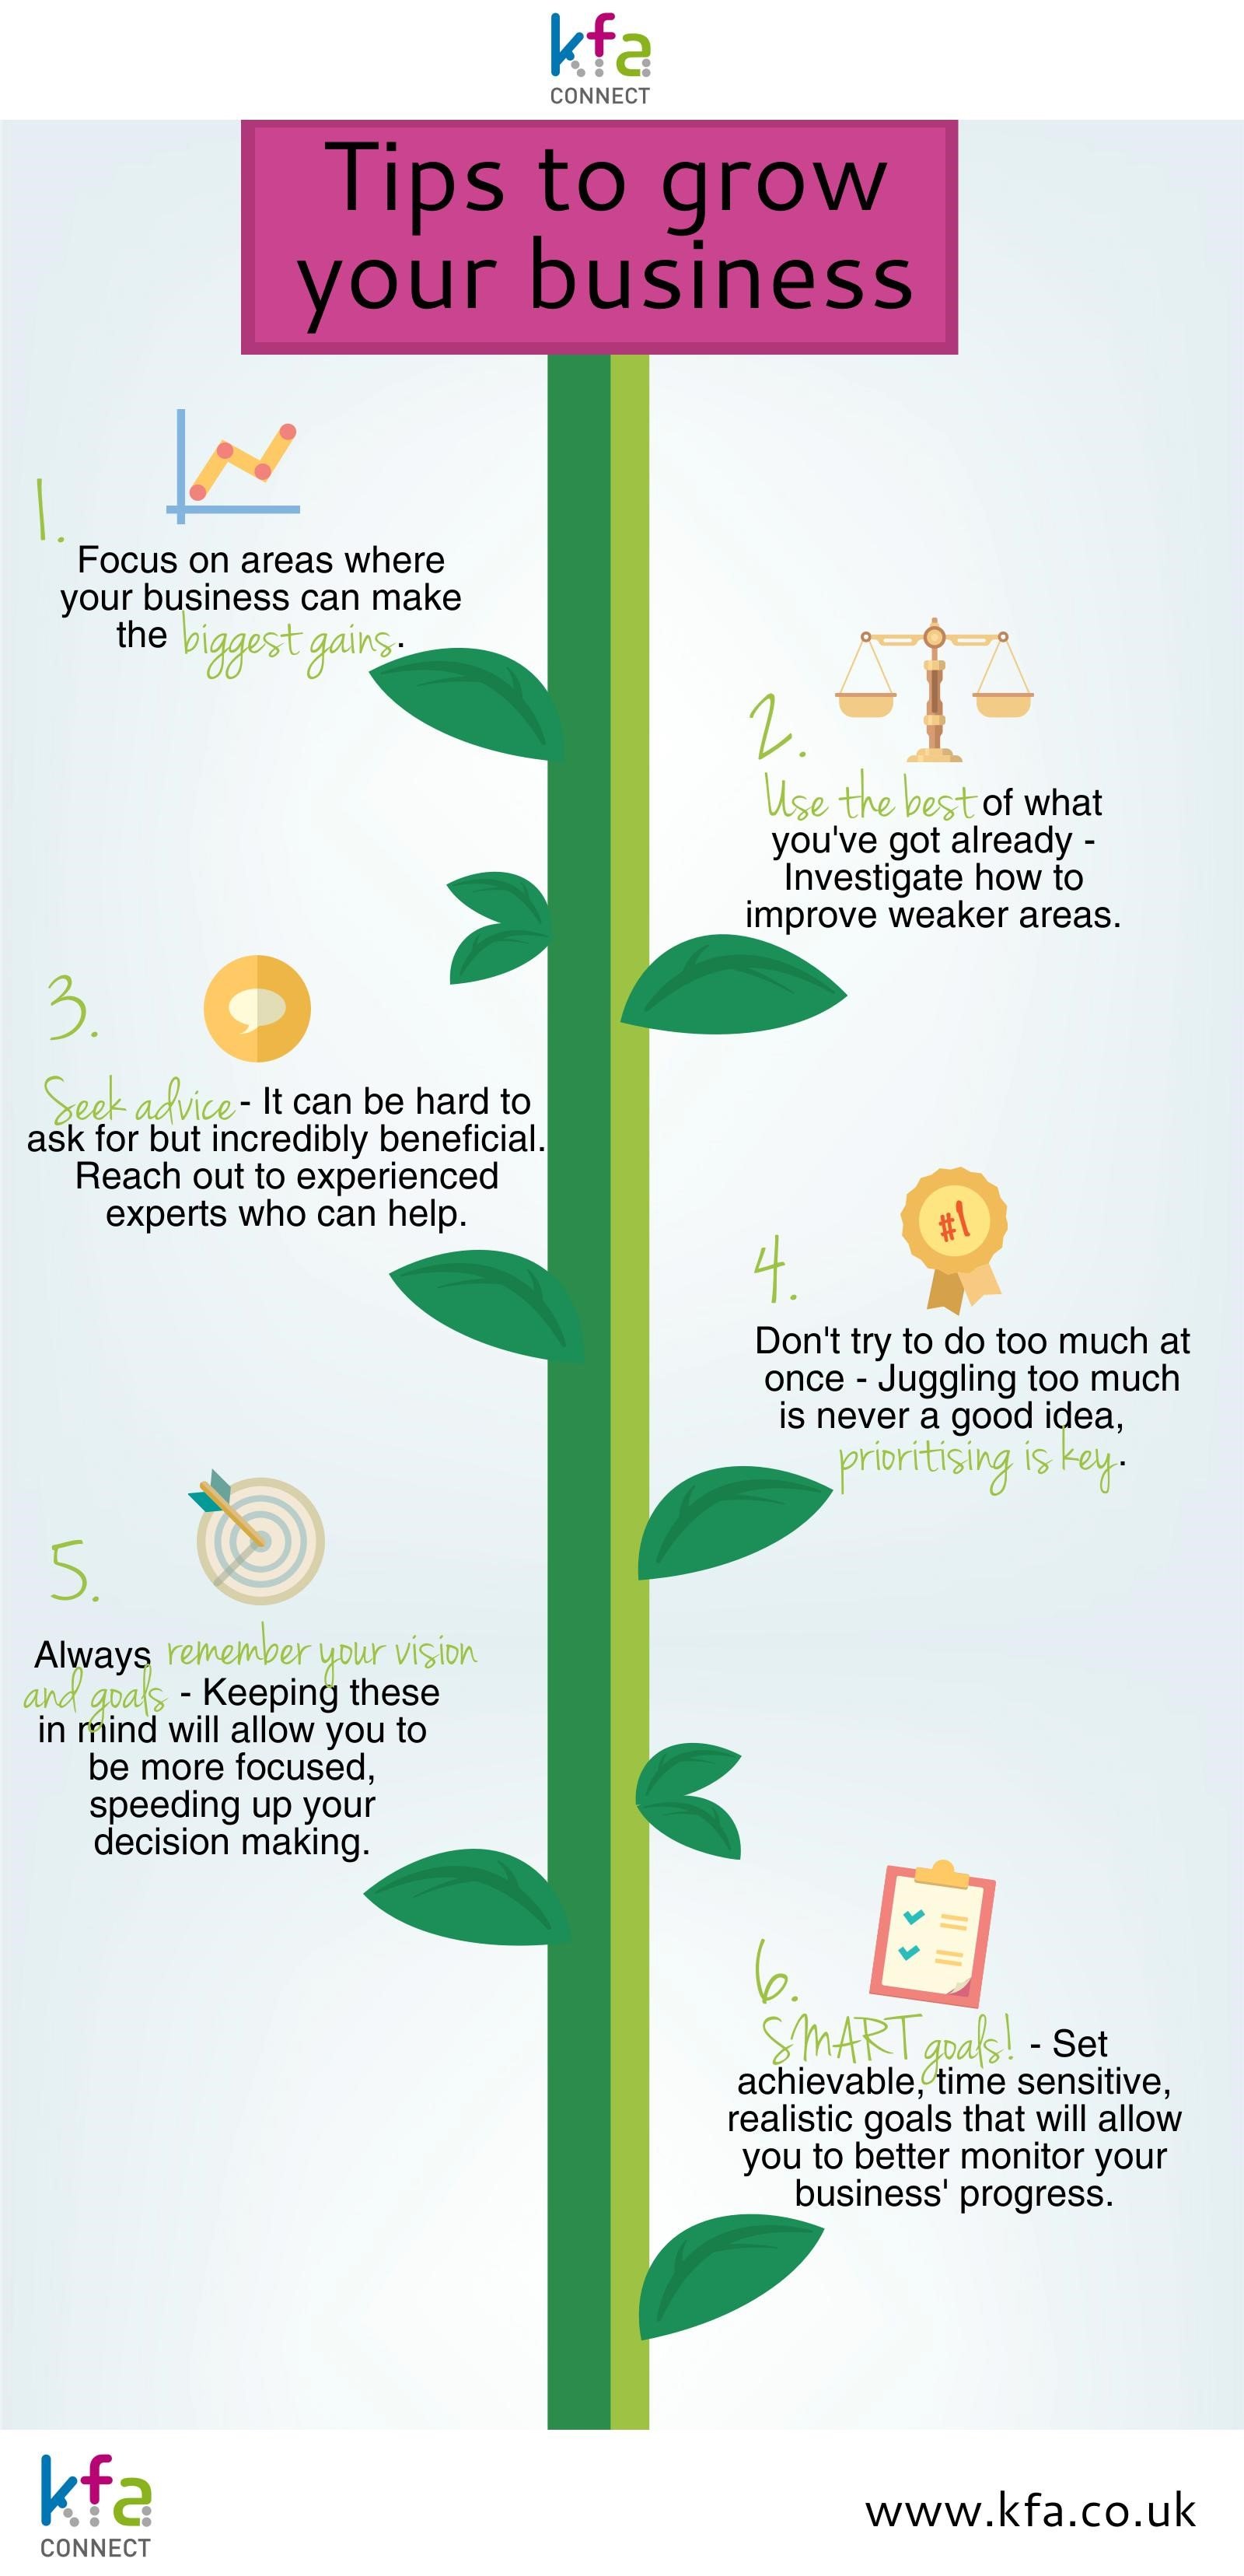 Tips to Grow your Business Sept 2017 Infographic - KFA's Top Tips to Help Grow Your Business